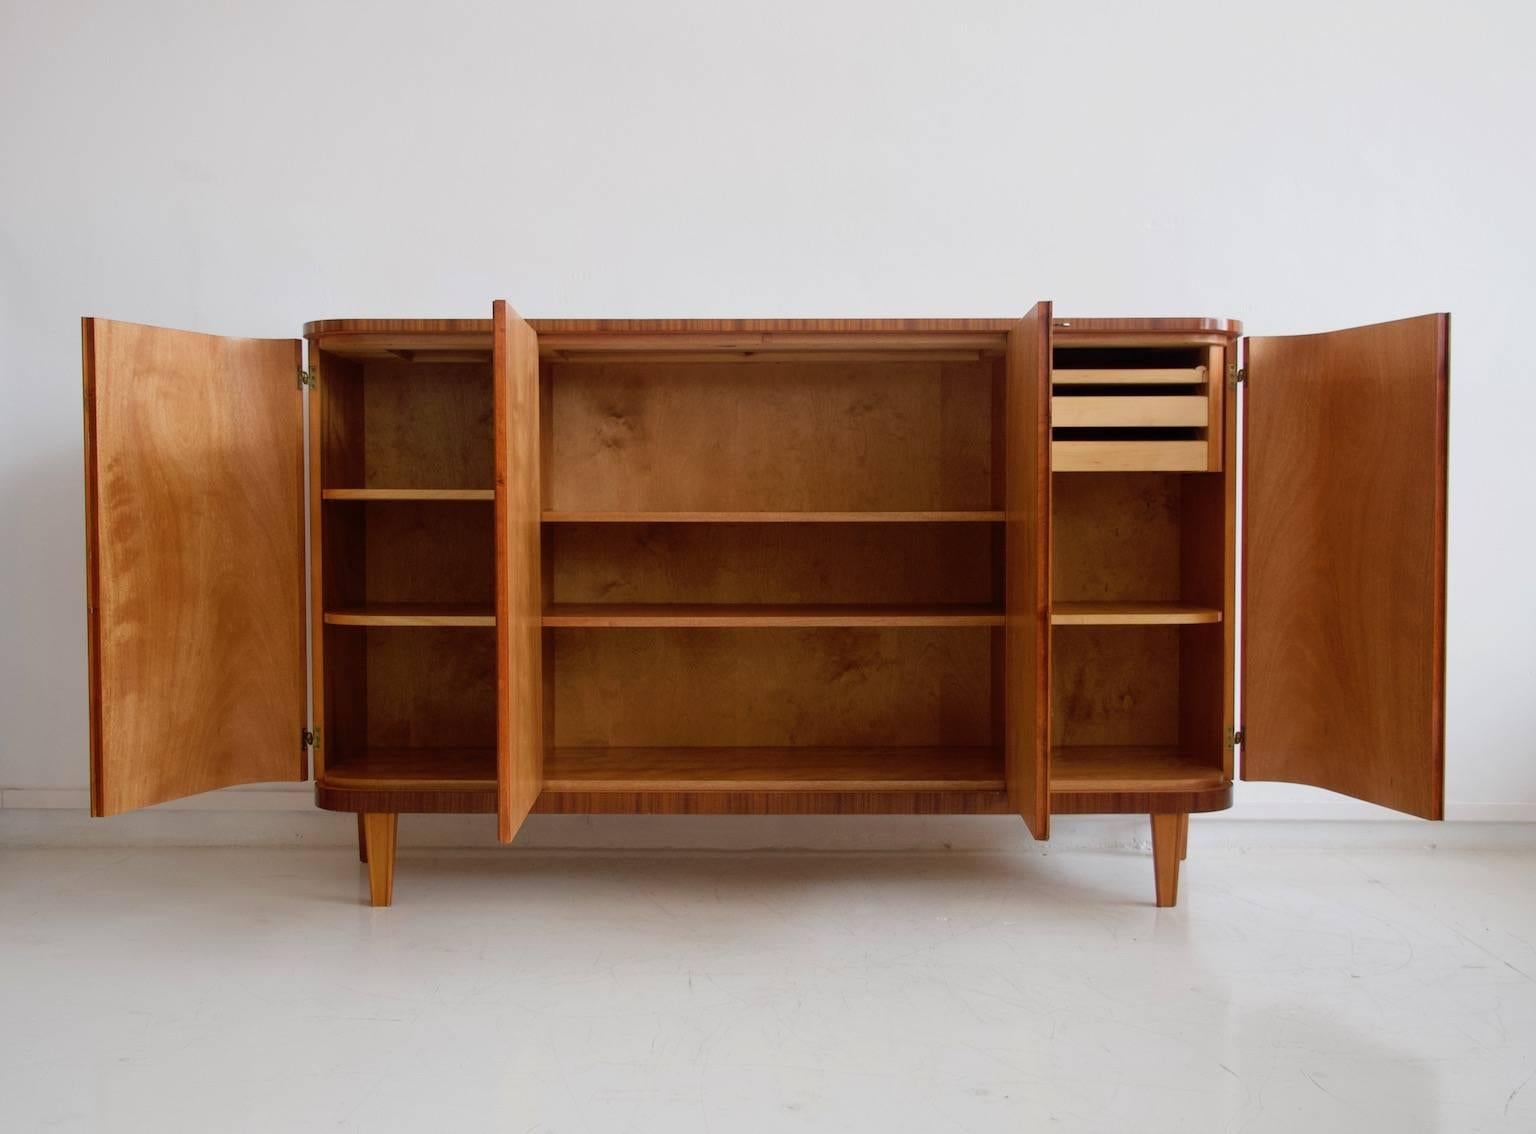 Mahogany cabinet manufactured by AB Seffle Mobelfabrik, 1940s. Front with four doors, the ones on the sides are beautifully curved. Interior shelves and trays. Key available. Restored, no marks.